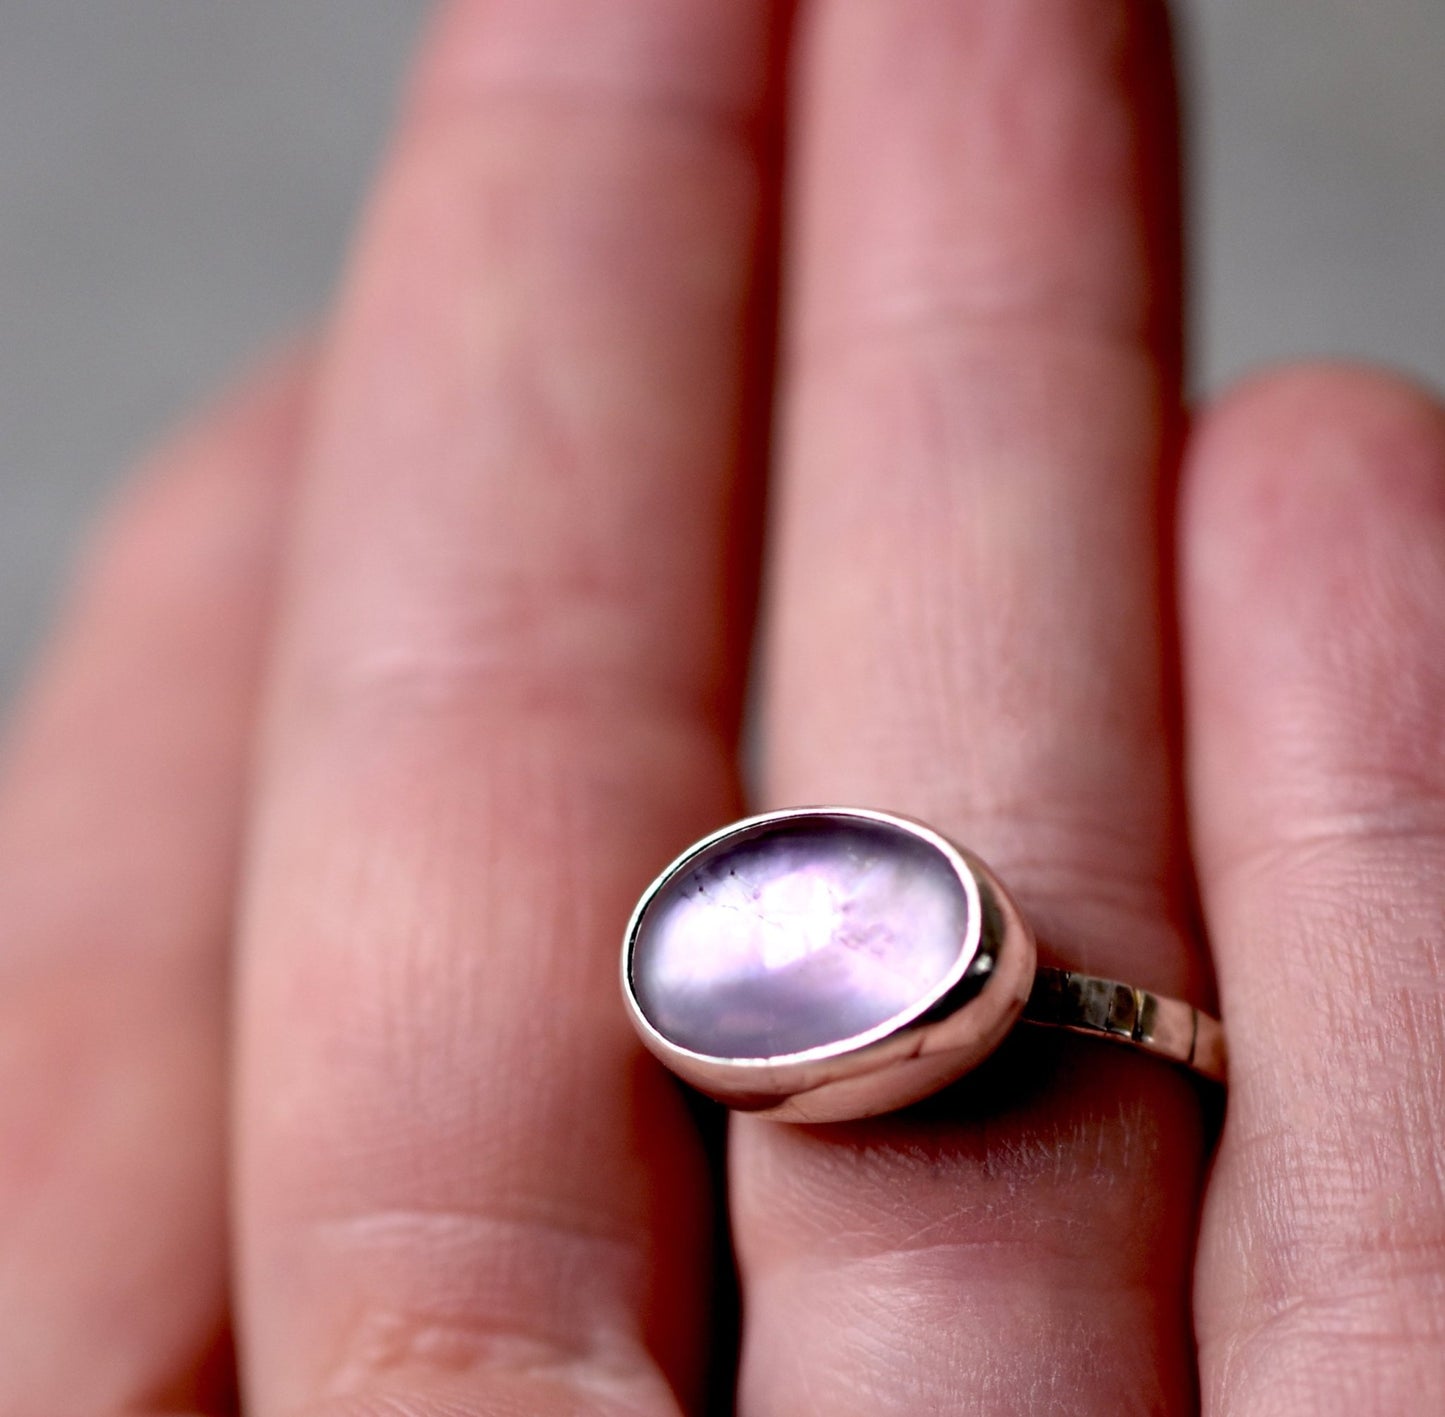 Purple Haze Amethyst Over Mother of Pearl Ring - Bluecave Jewelry